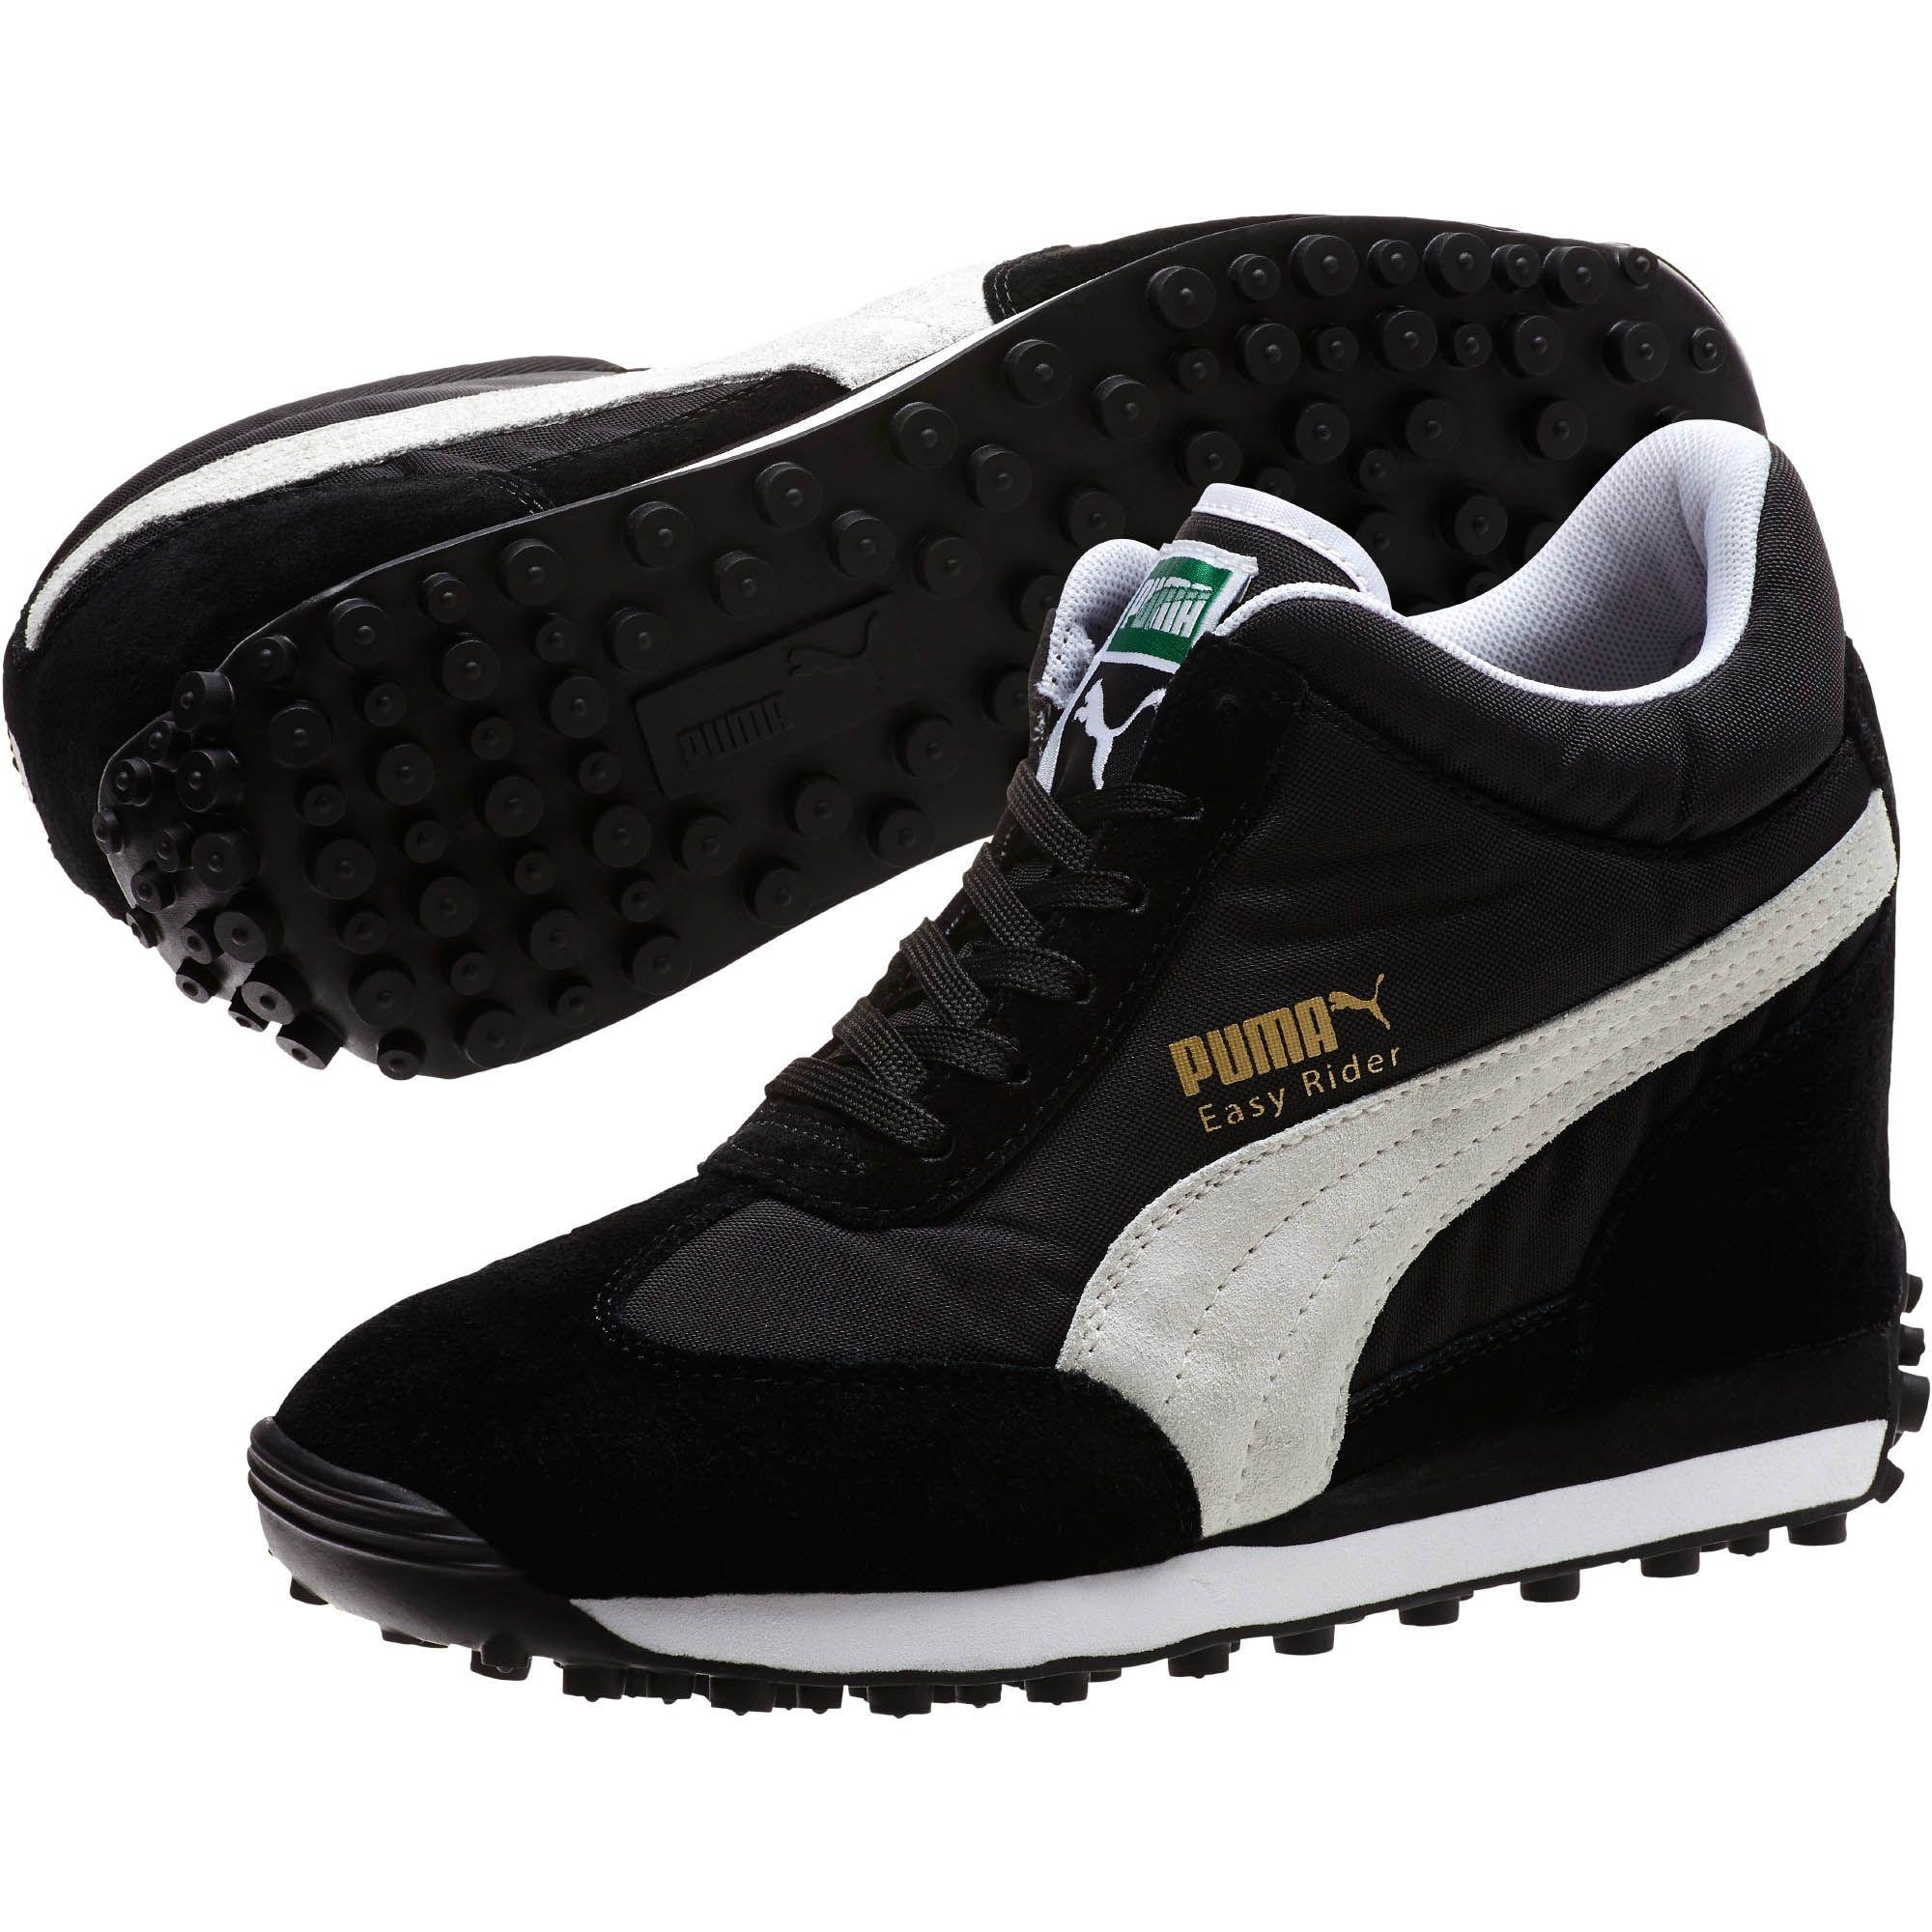 PUMA Synthetic Easy Rider Wedge Lo Women's Wedge Sneakers ...